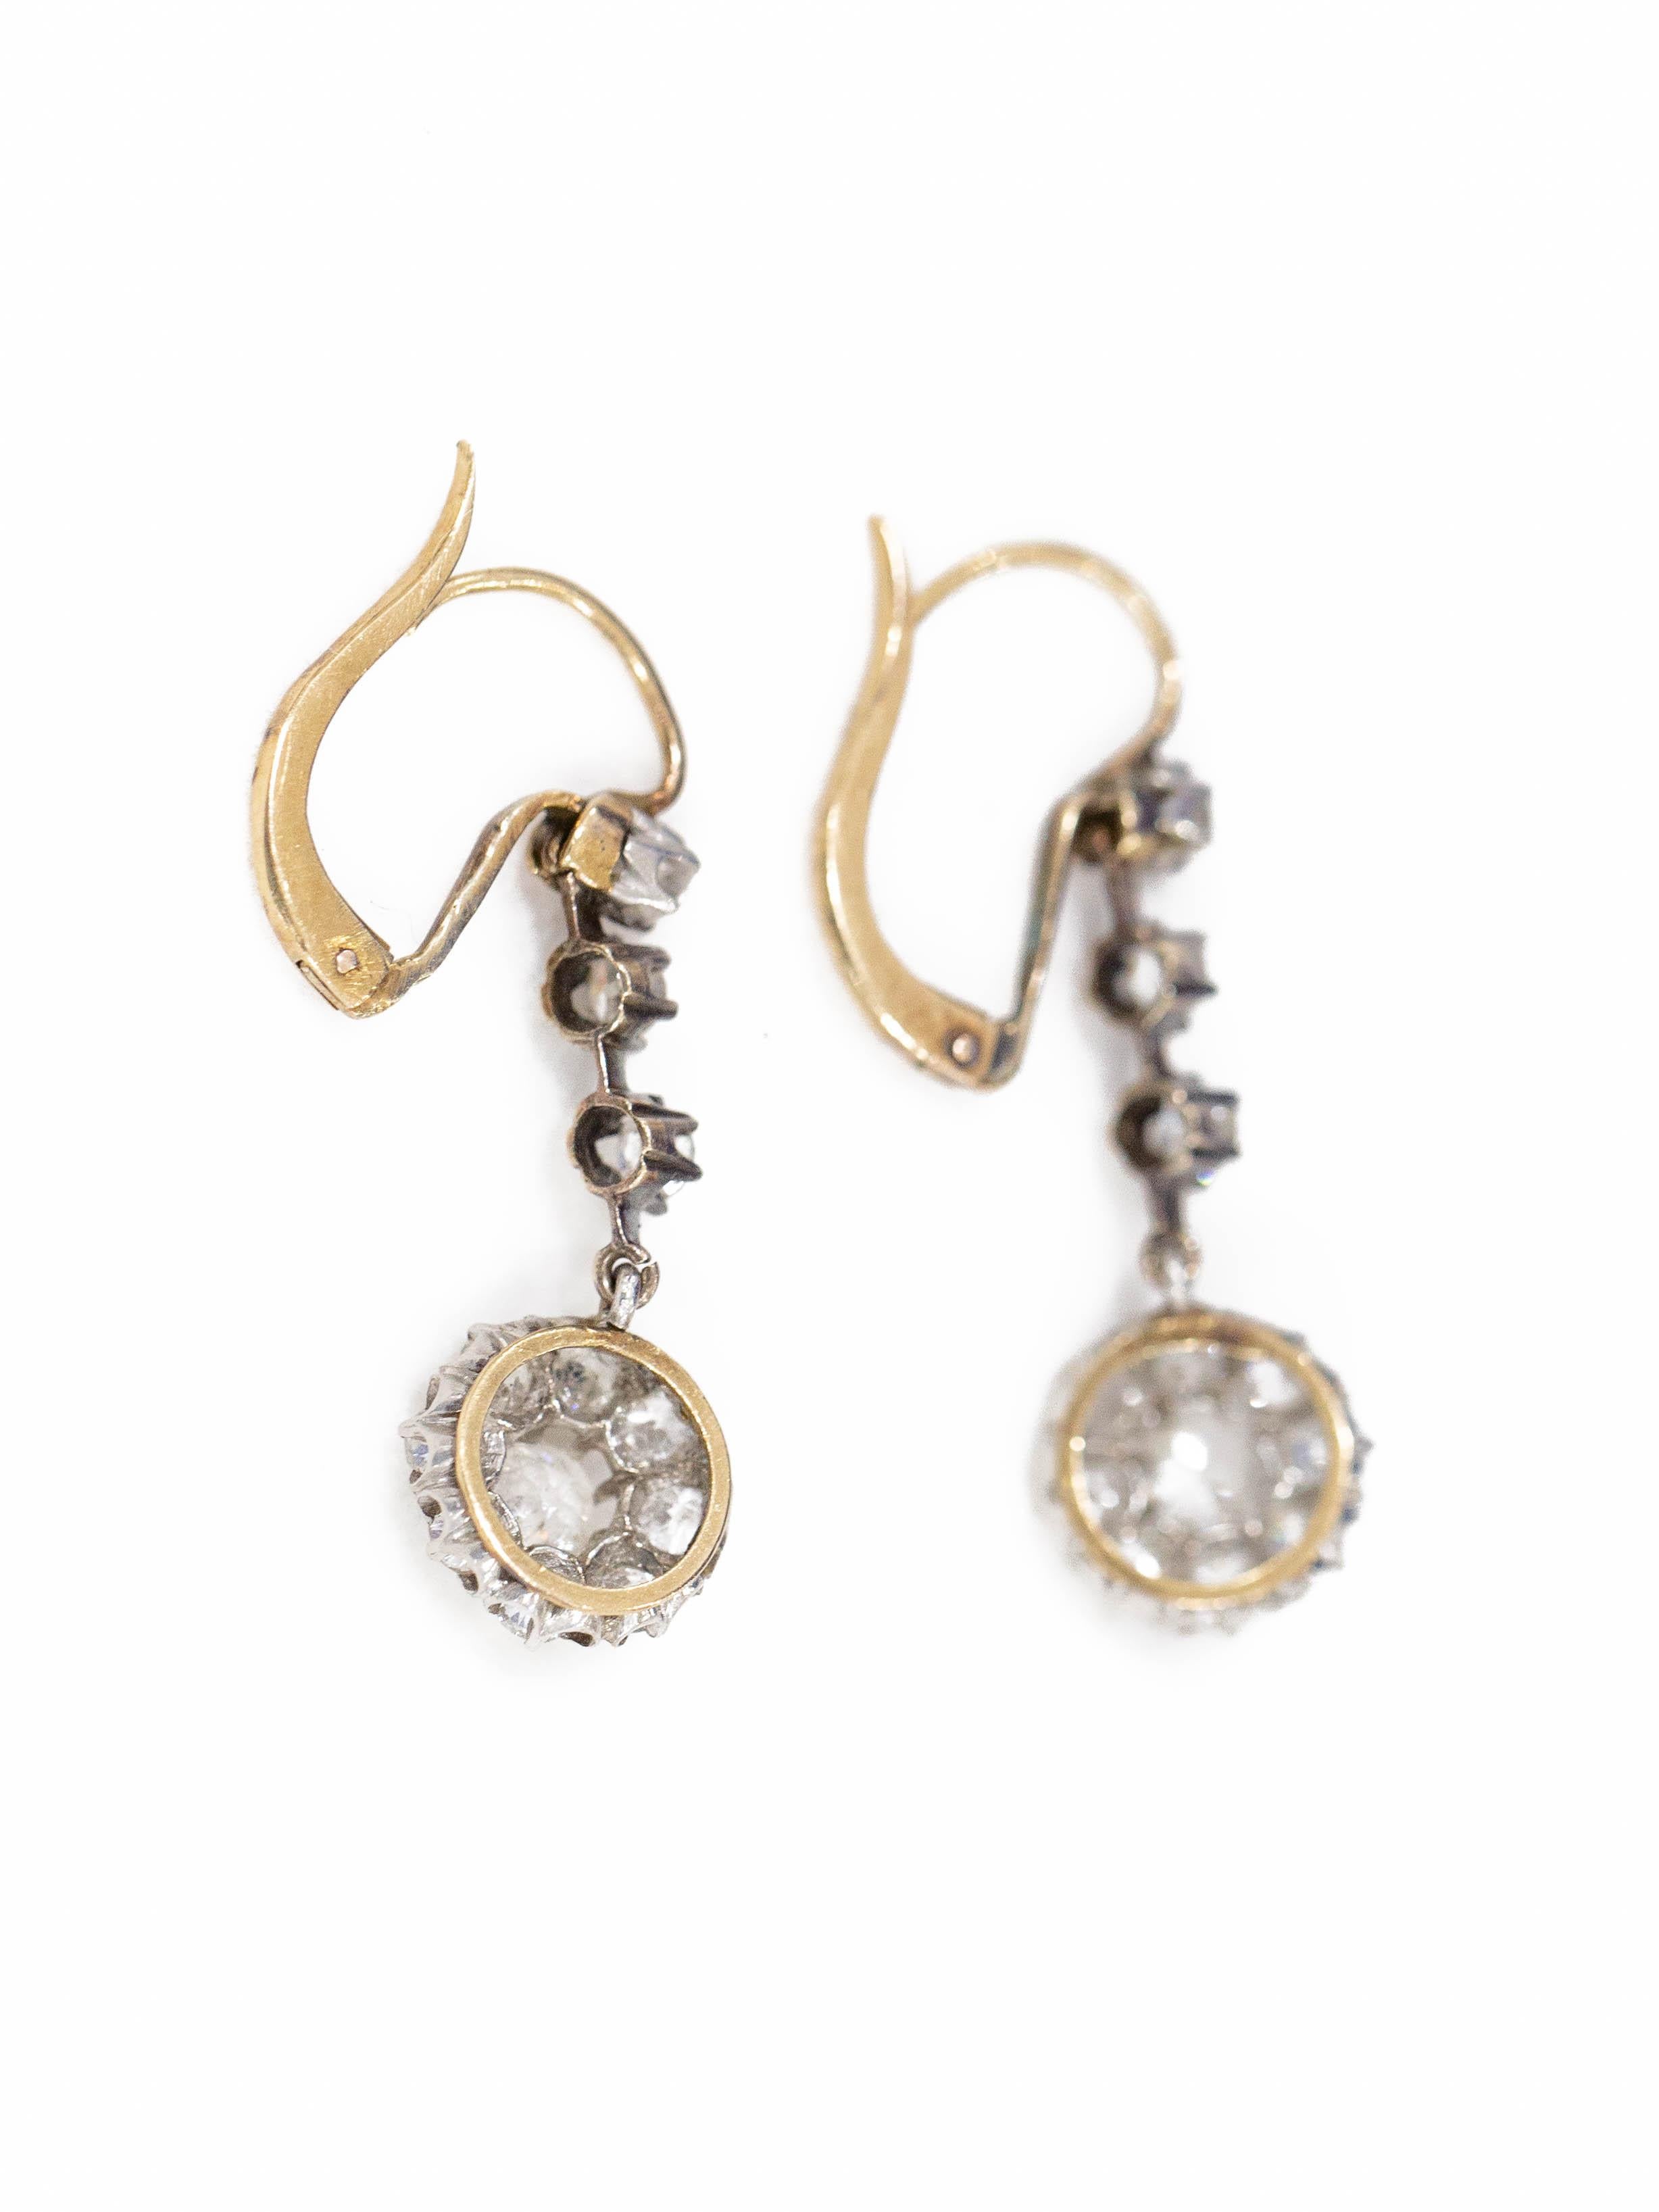 Women's Pair of English Victorian Diamond Earrings in Silver on Gold Setting, circa 1880